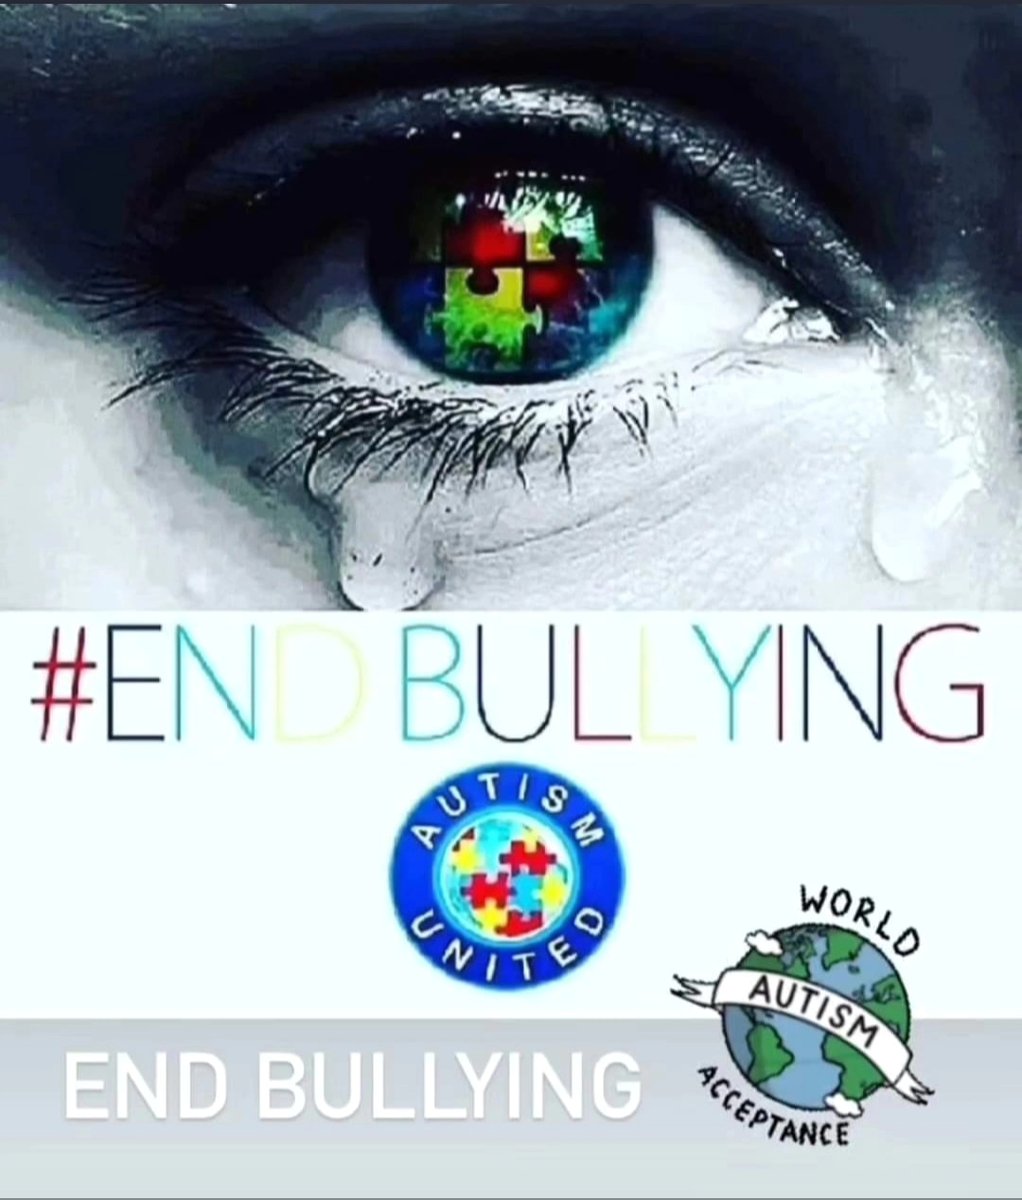 🗣 #endbullying Just so you know 🤔💙❤💚💜💛 #autismacceptance 🙌🏽 Every day is autism awareness day in our house. #autism #autismdad #autismawareness #autismawarenessmonth #autismfamily #autismparent #autismrocks #differentnotless 🙋🏽‍♂️🙋‍♀️ Let's Band together to raise awareness 🙏👊